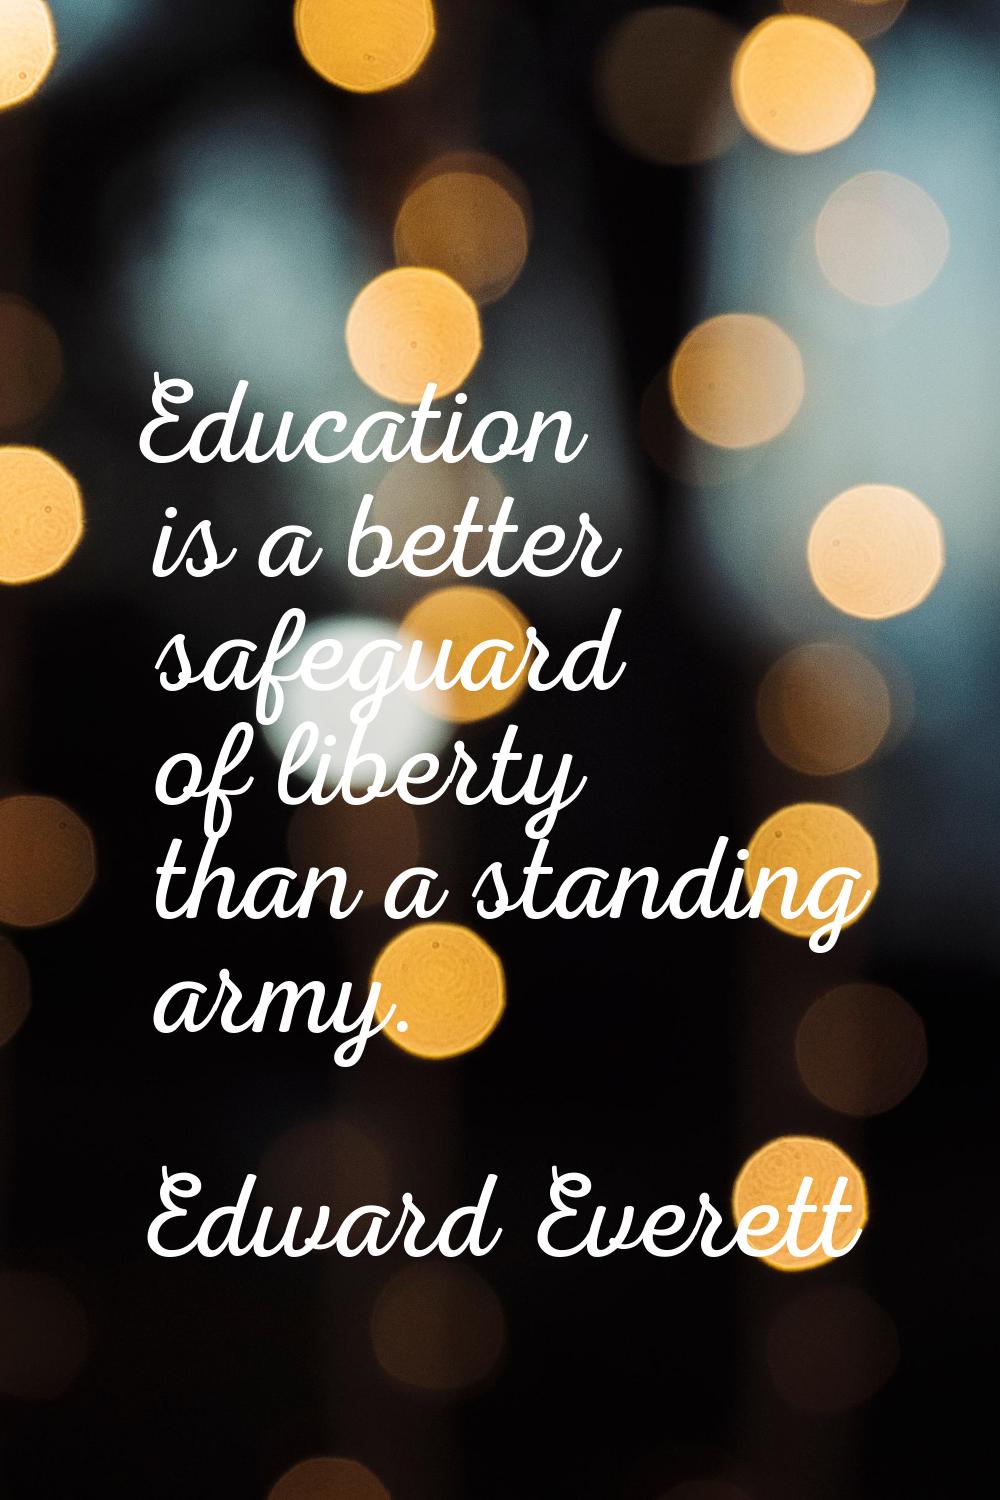 Education is a better safeguard of liberty than a standing army.